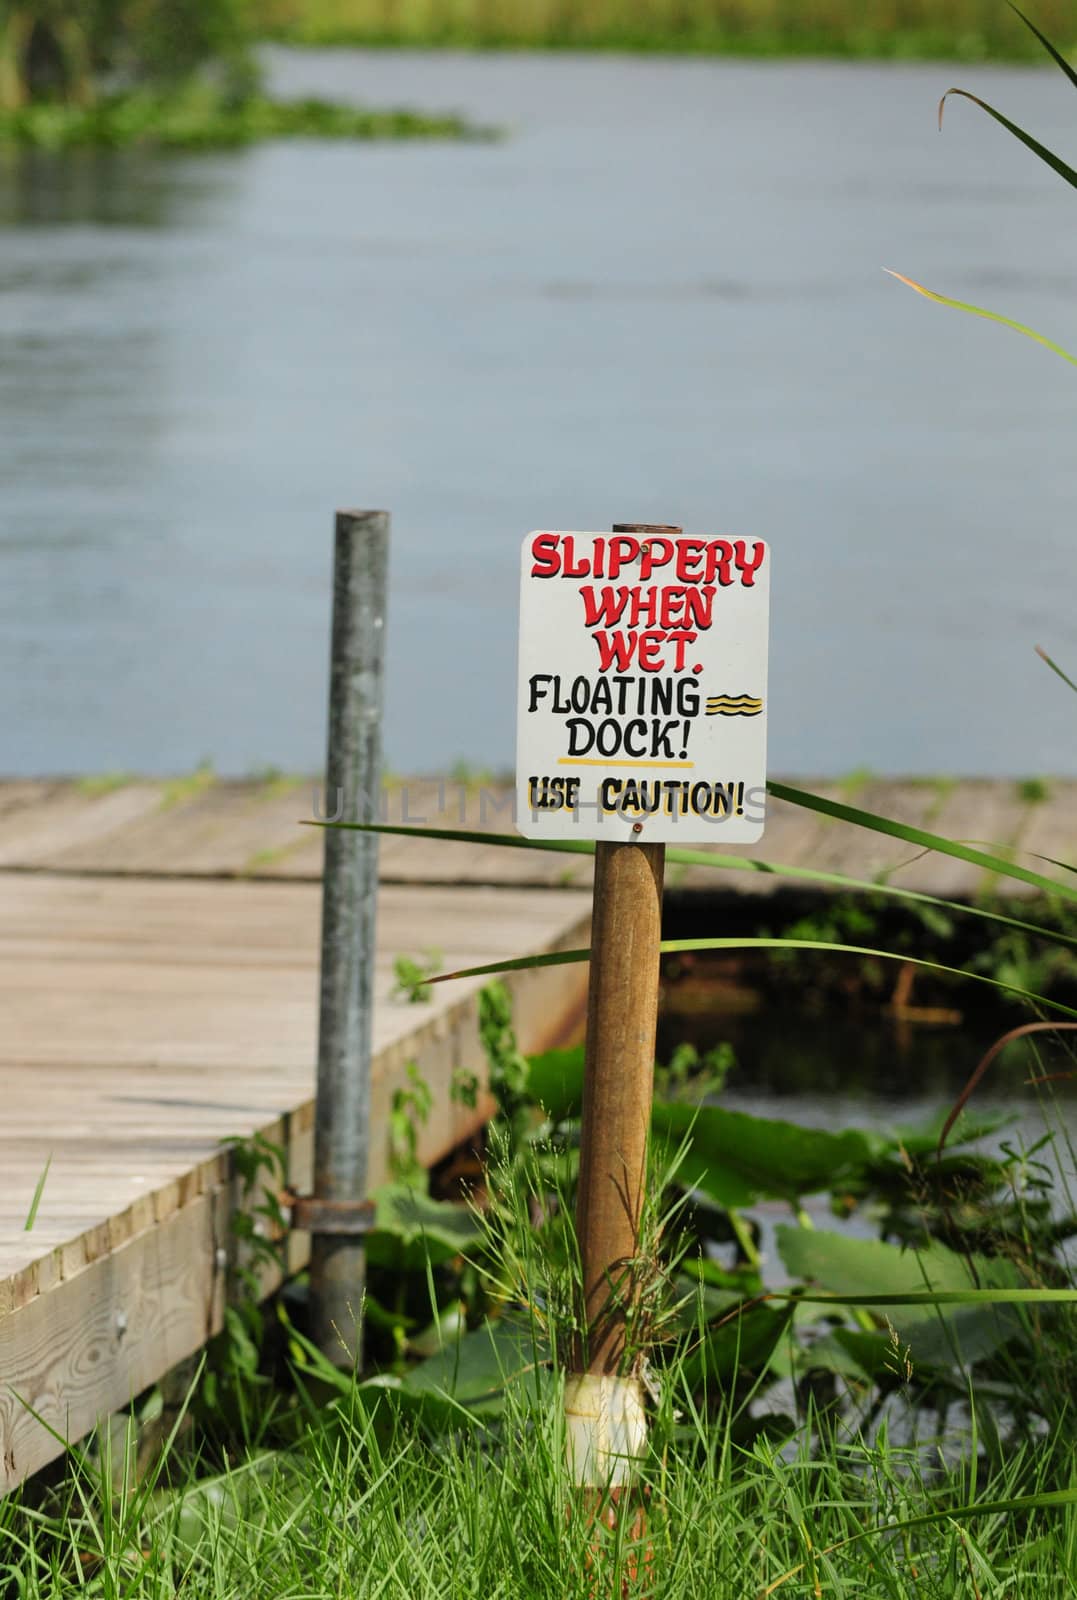 Slippery when wet by ftlaudgirl